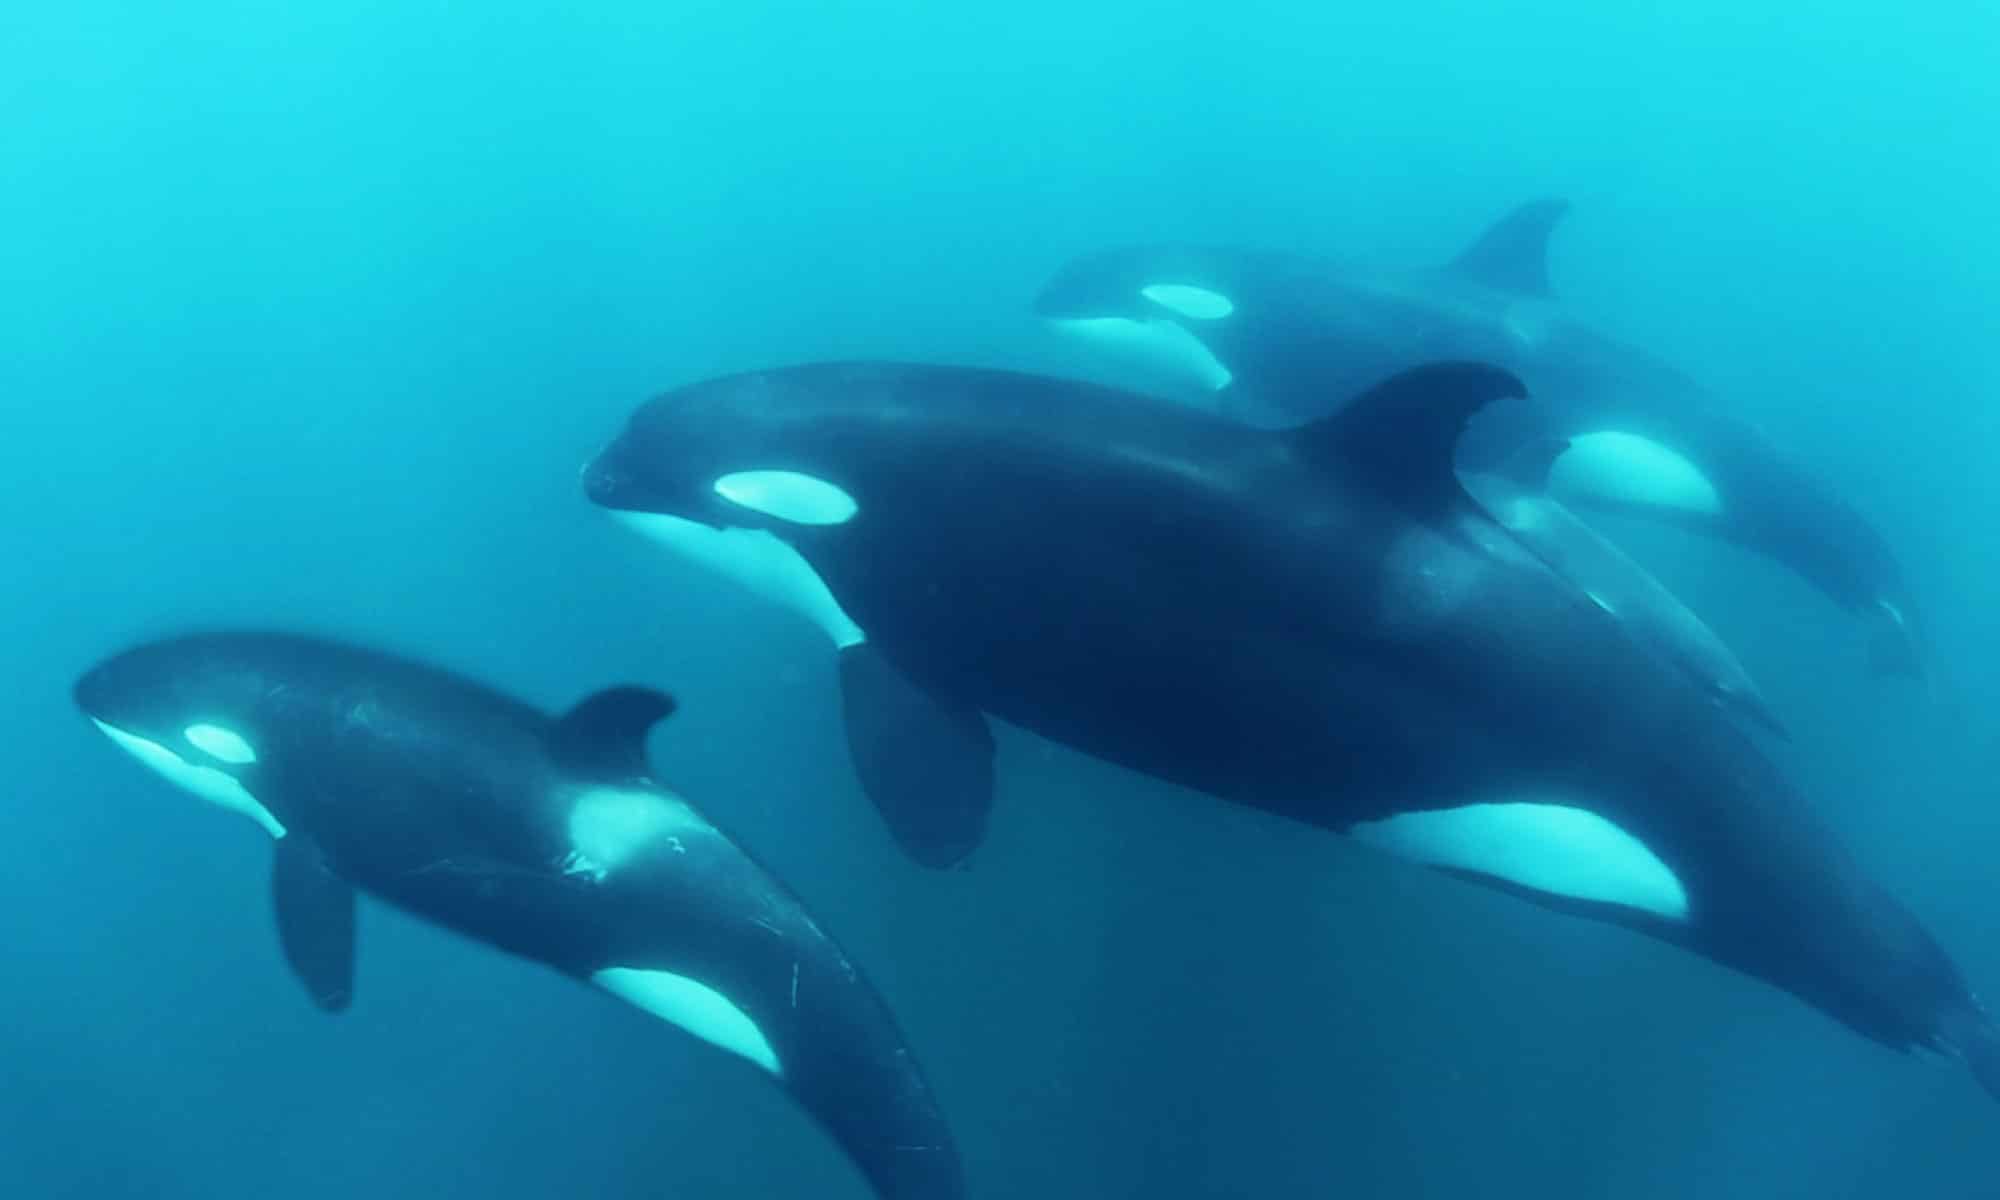 baby orca whale alone